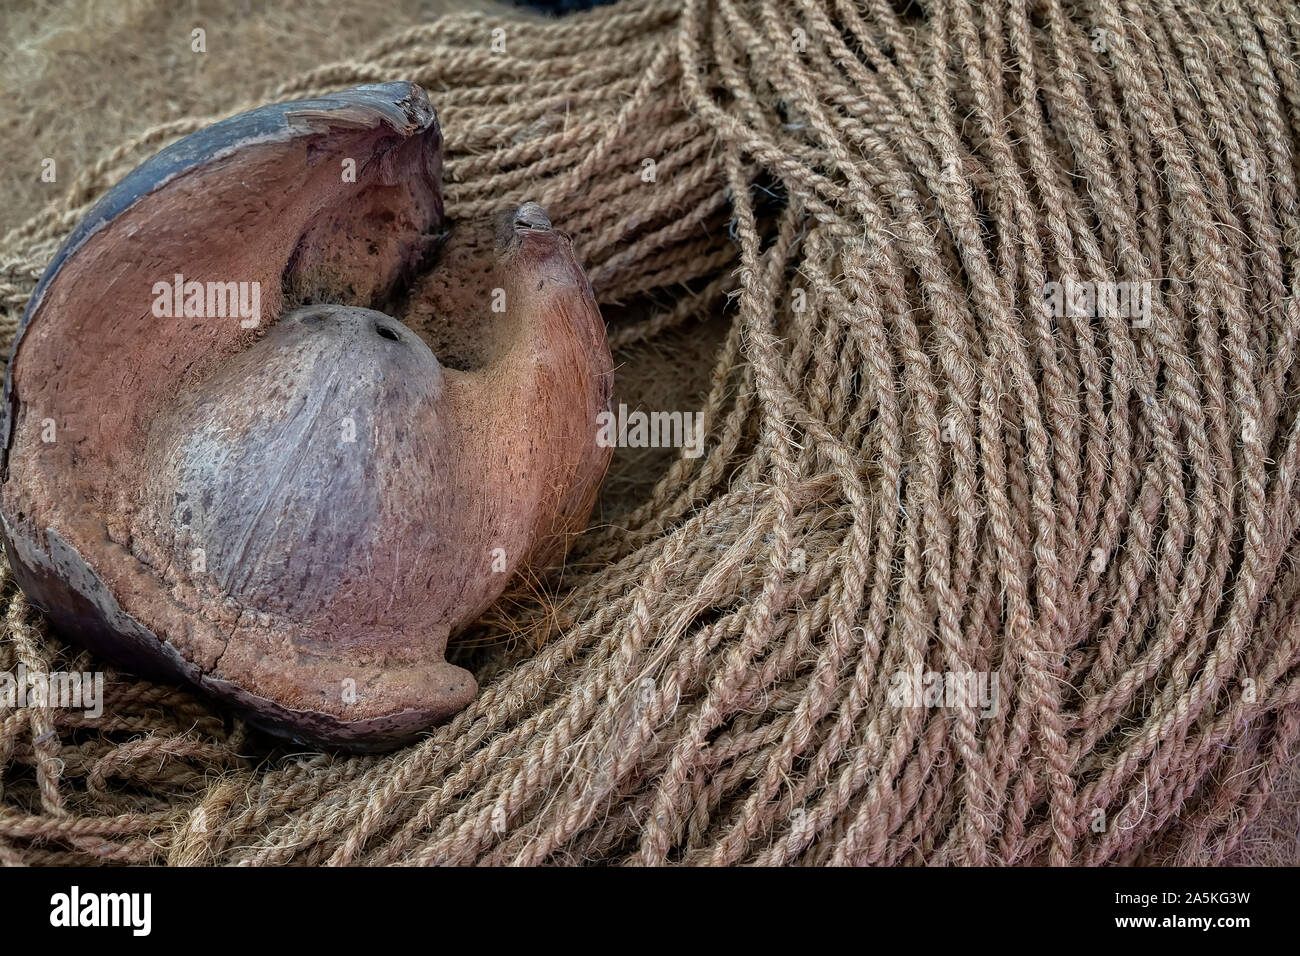 Broken Coconut and coconut rope, natural background, texture Stock Photo